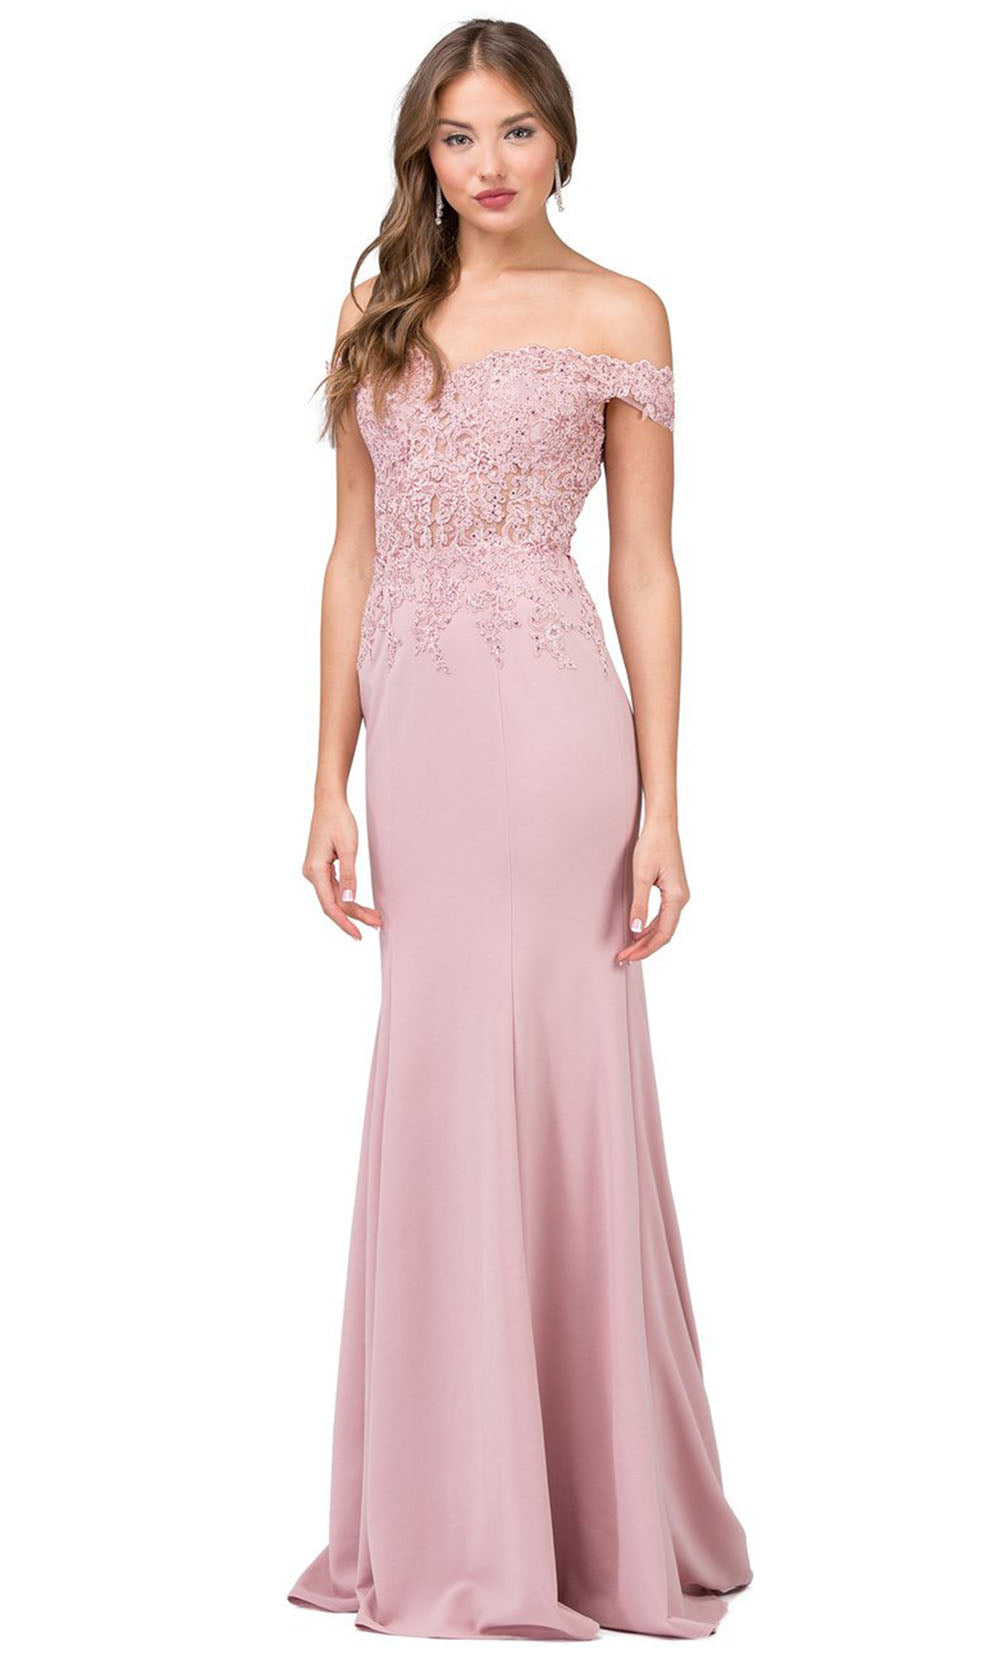 Dancing Queen - 2358 Embroidered Off Shoulder Trumpet Dress With Train In Pink